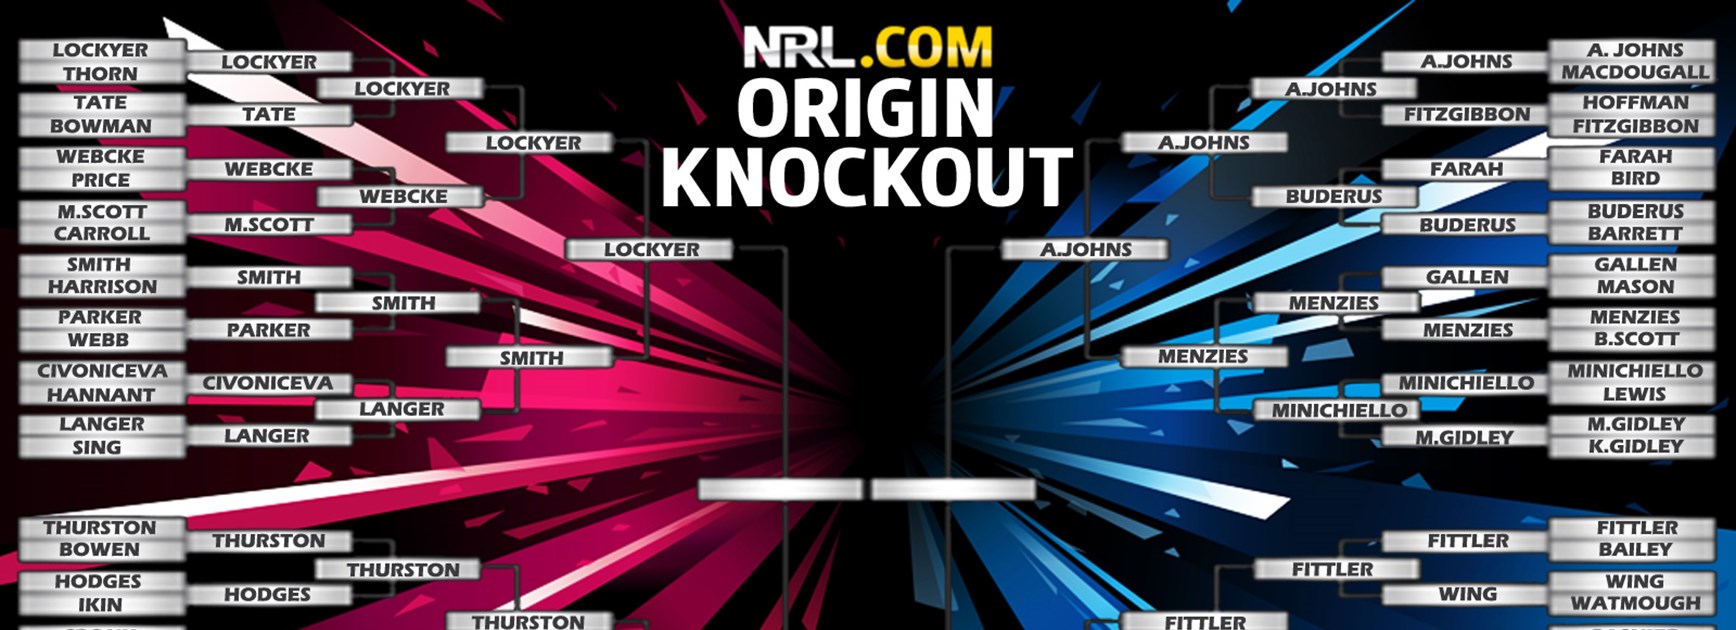 Just four players remain in NRL.com's Origin Knockout poll.